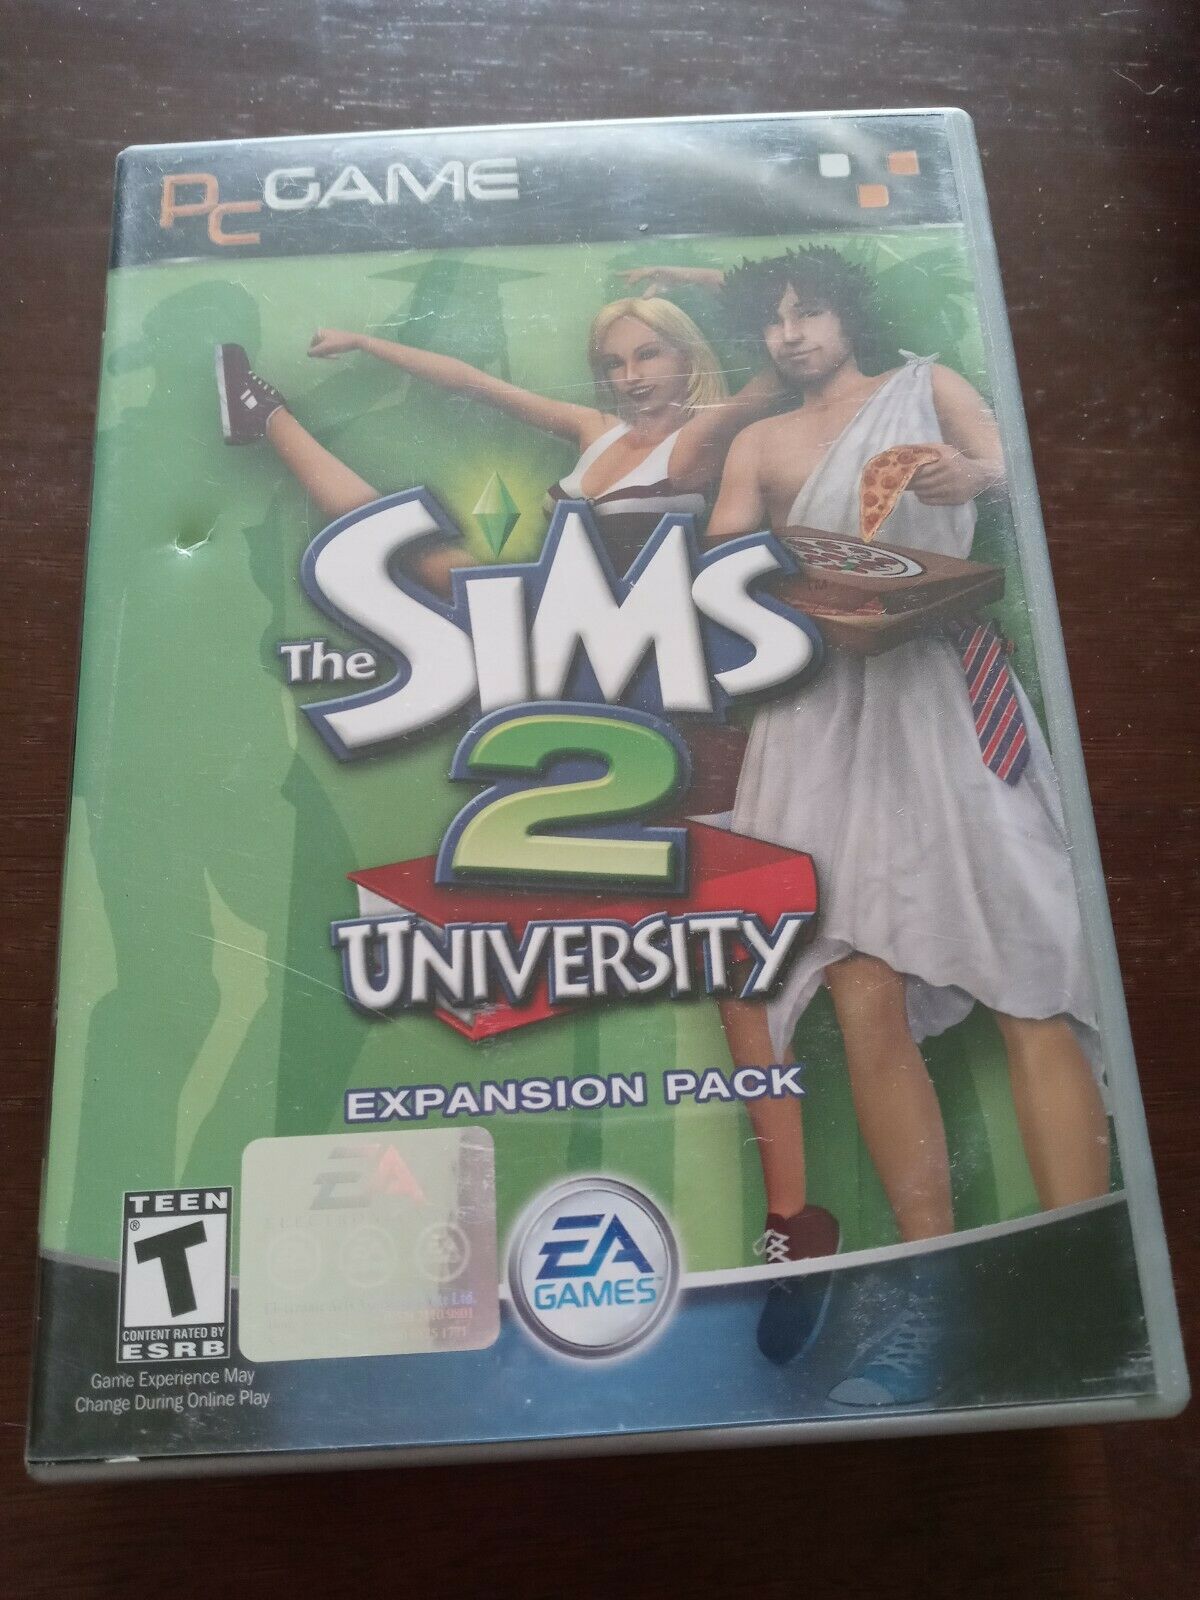 Primary image for Sims 2: University (PC, 2005) Expansion 2 Disc Pack Video Game